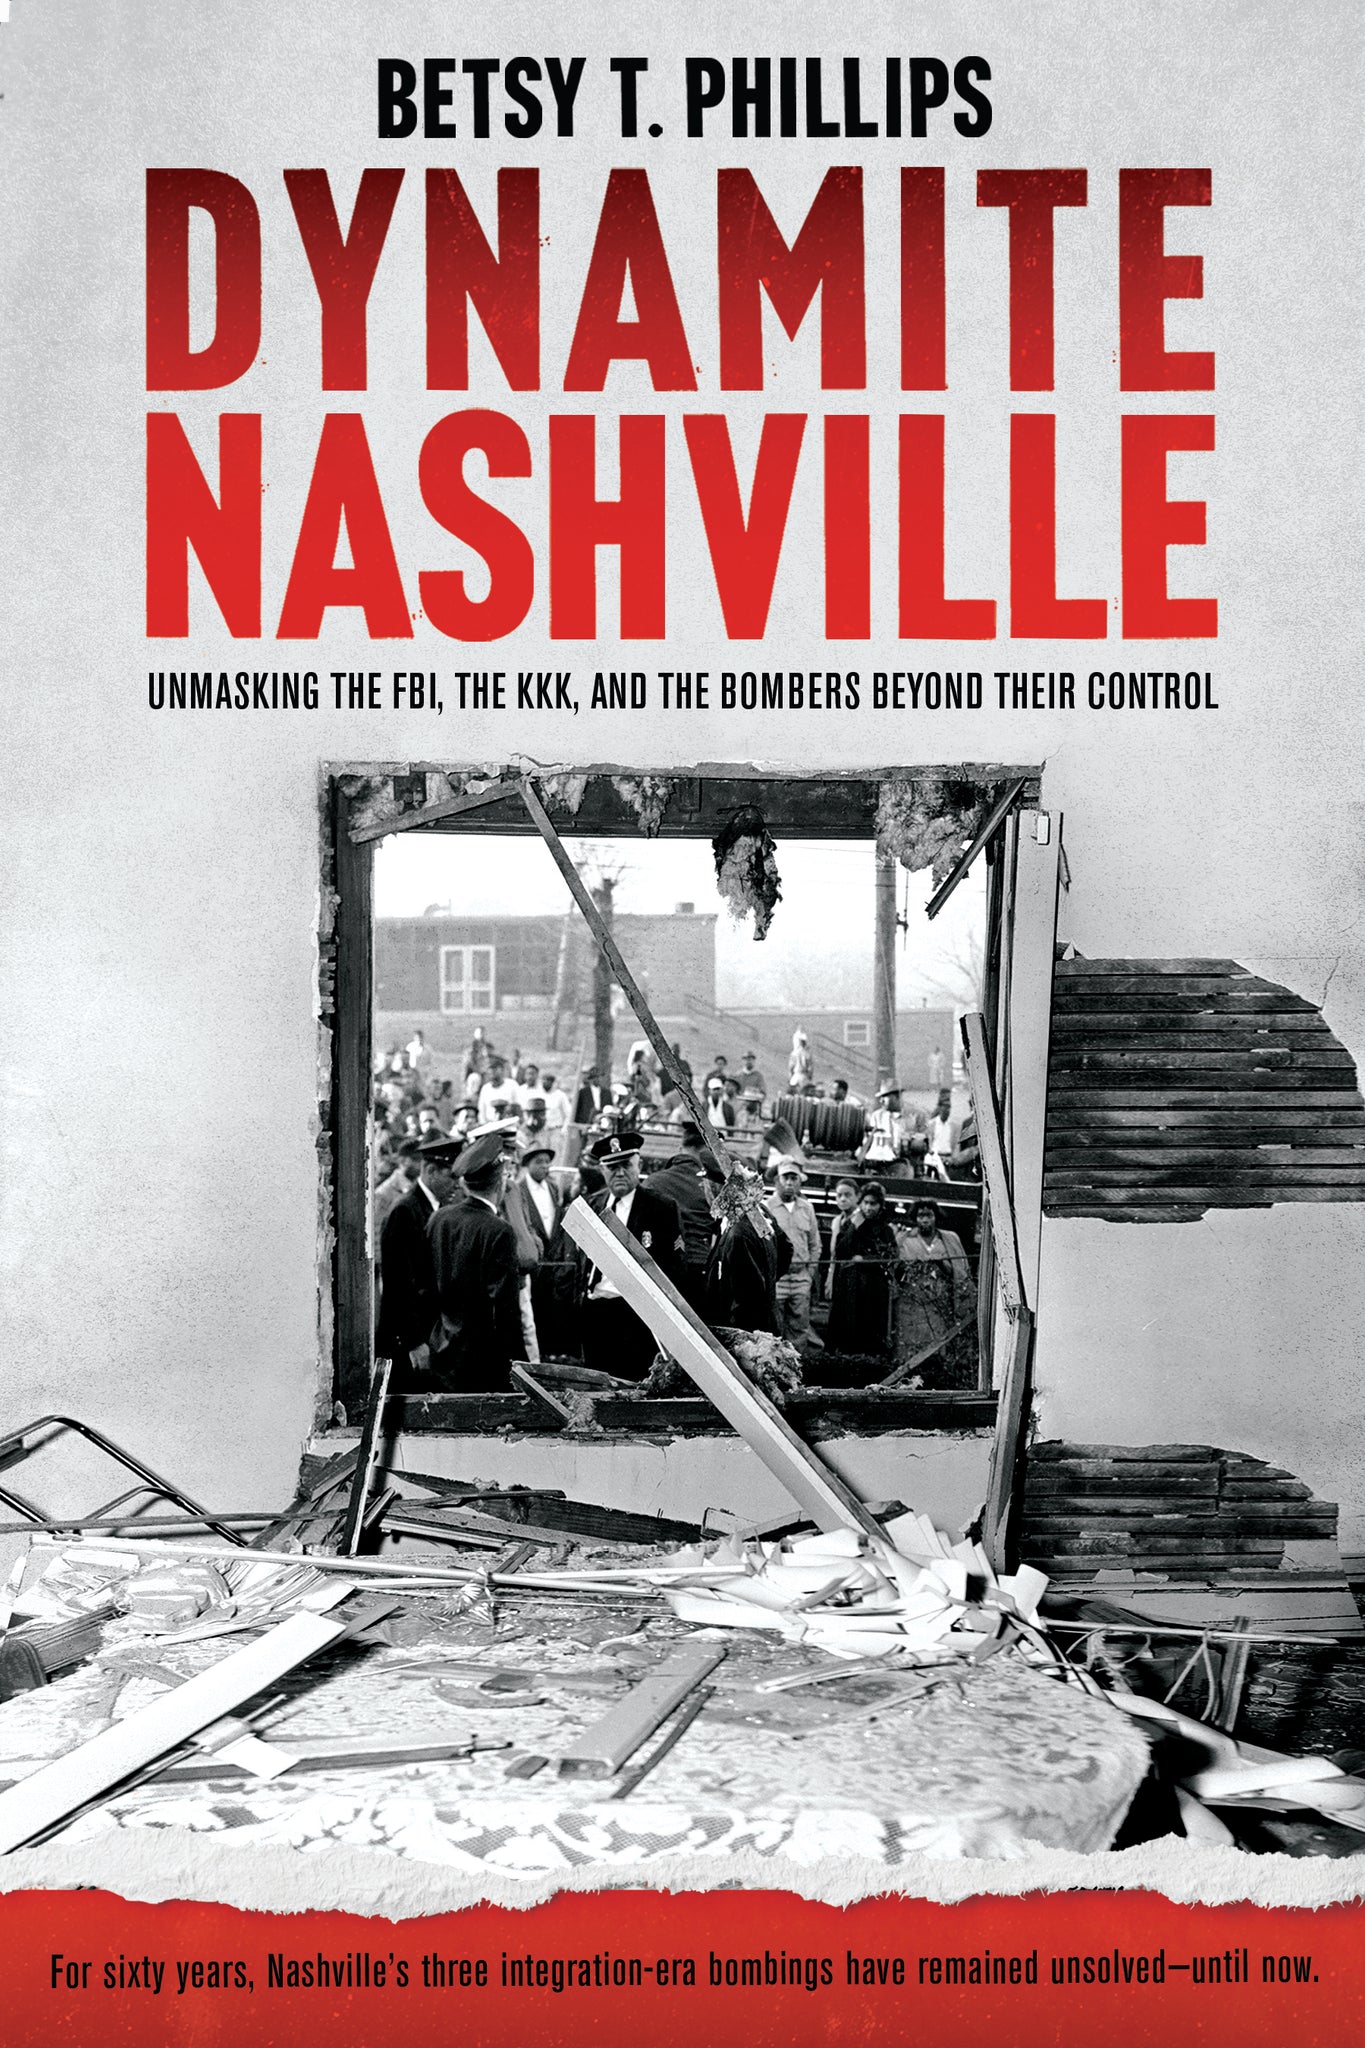 Dynamite Nashville: Unmasking the FBI, the KKK, and the Bombers Beyond their Control